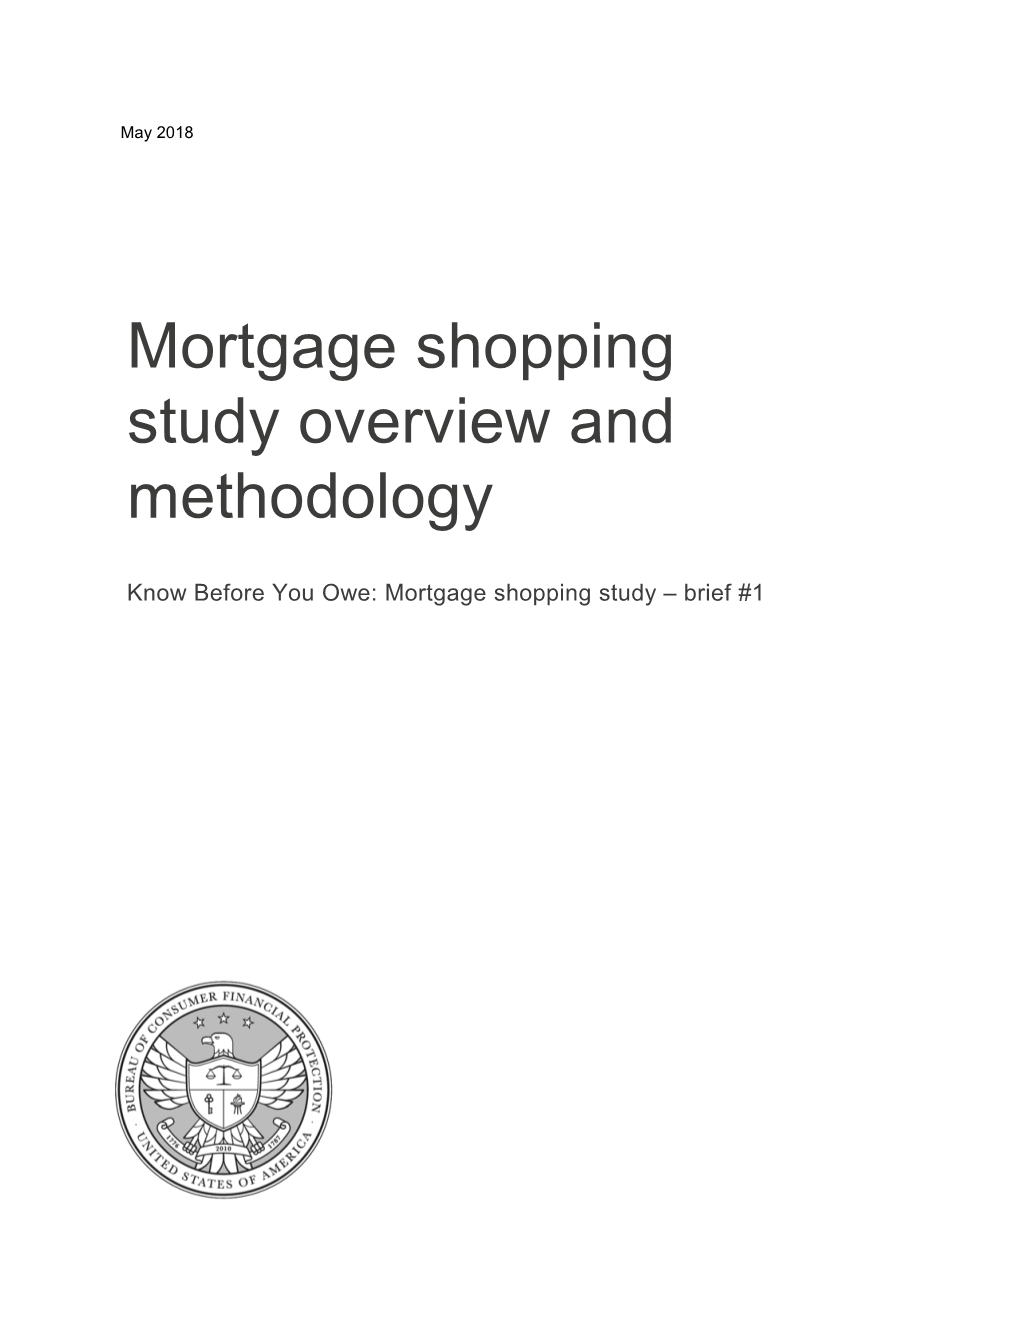 Mortgage Shopping Study Overview and Methodology